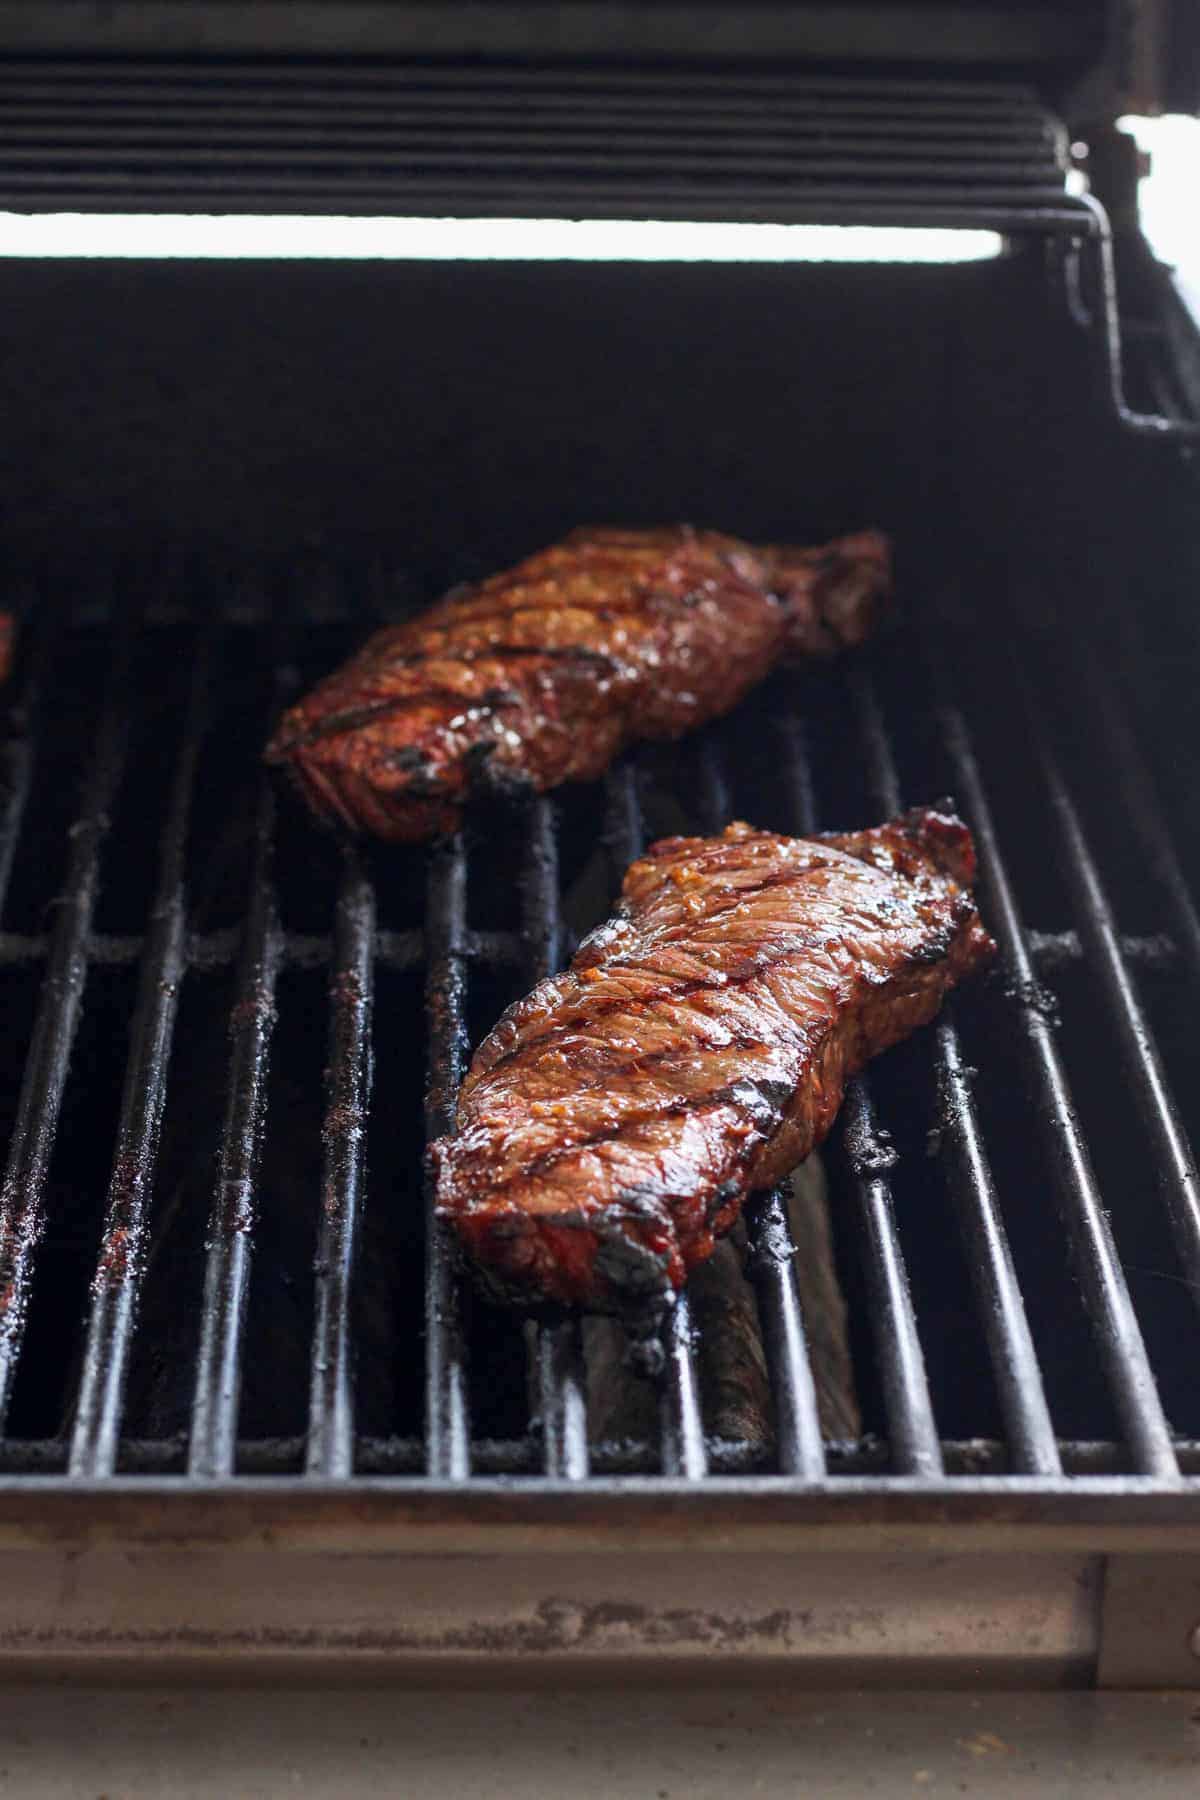 How to Grill Steak (Guide for Grilling Steak) - Fit Foodie Finds